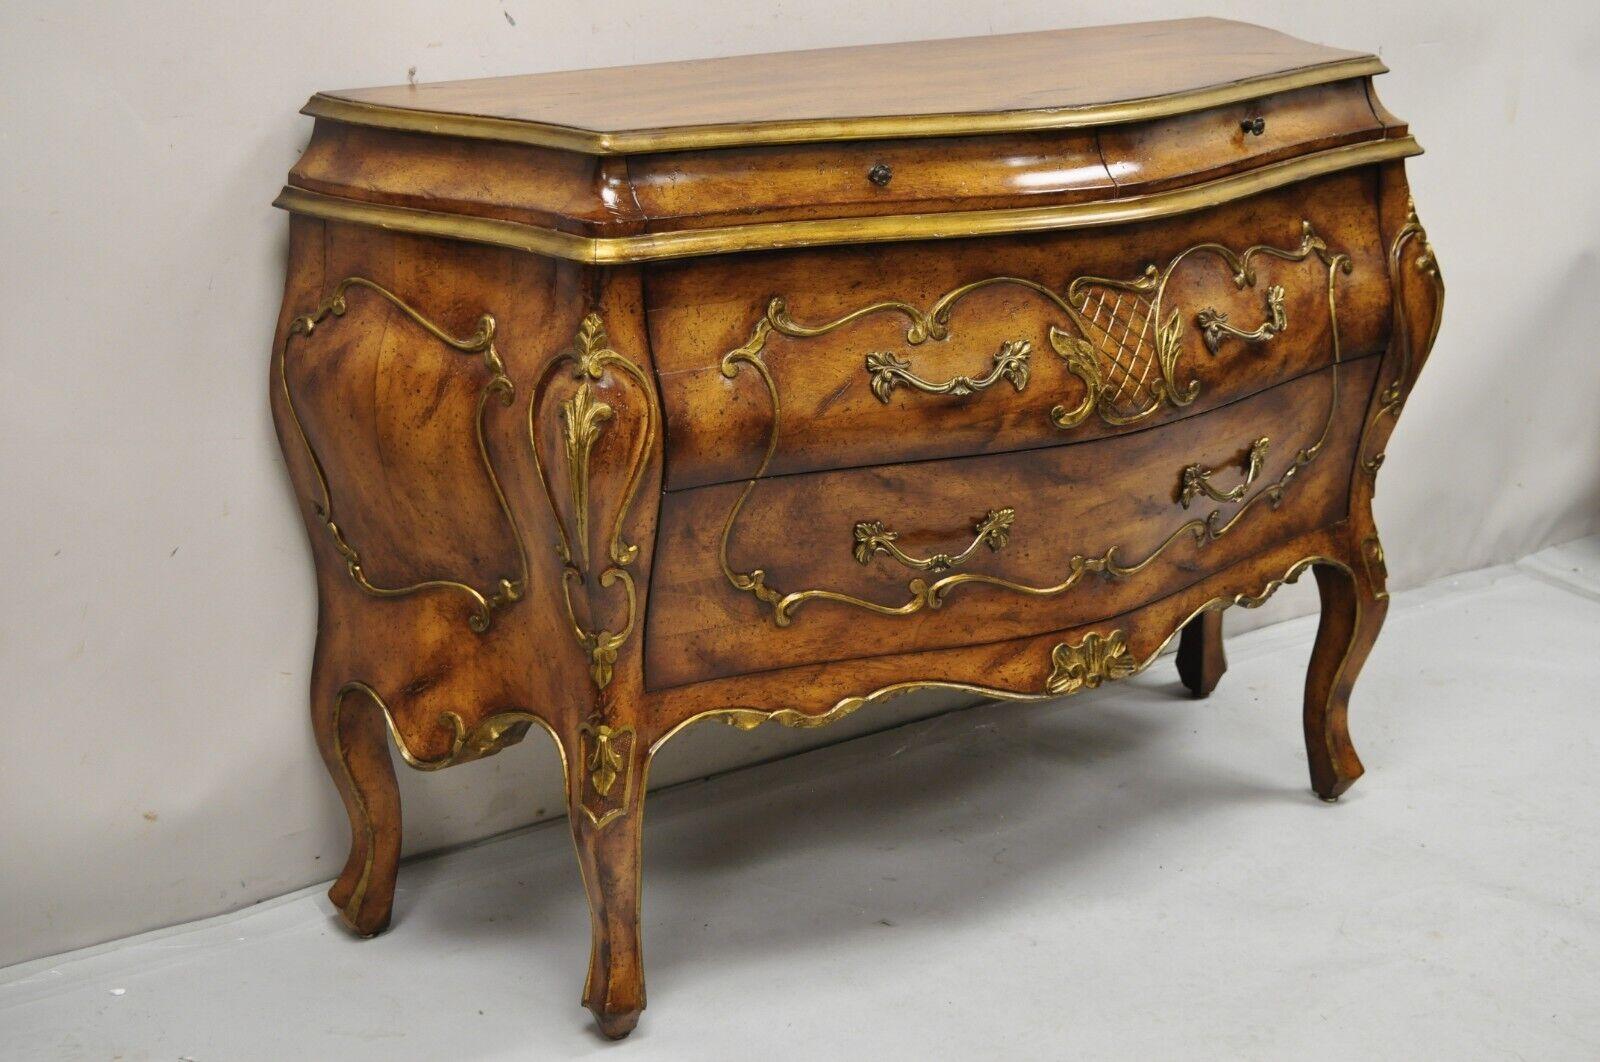 Vintage French Rococo Style Italian Bombe Commode Chest 4 Drawer Dresser. Cet article présente une finition 